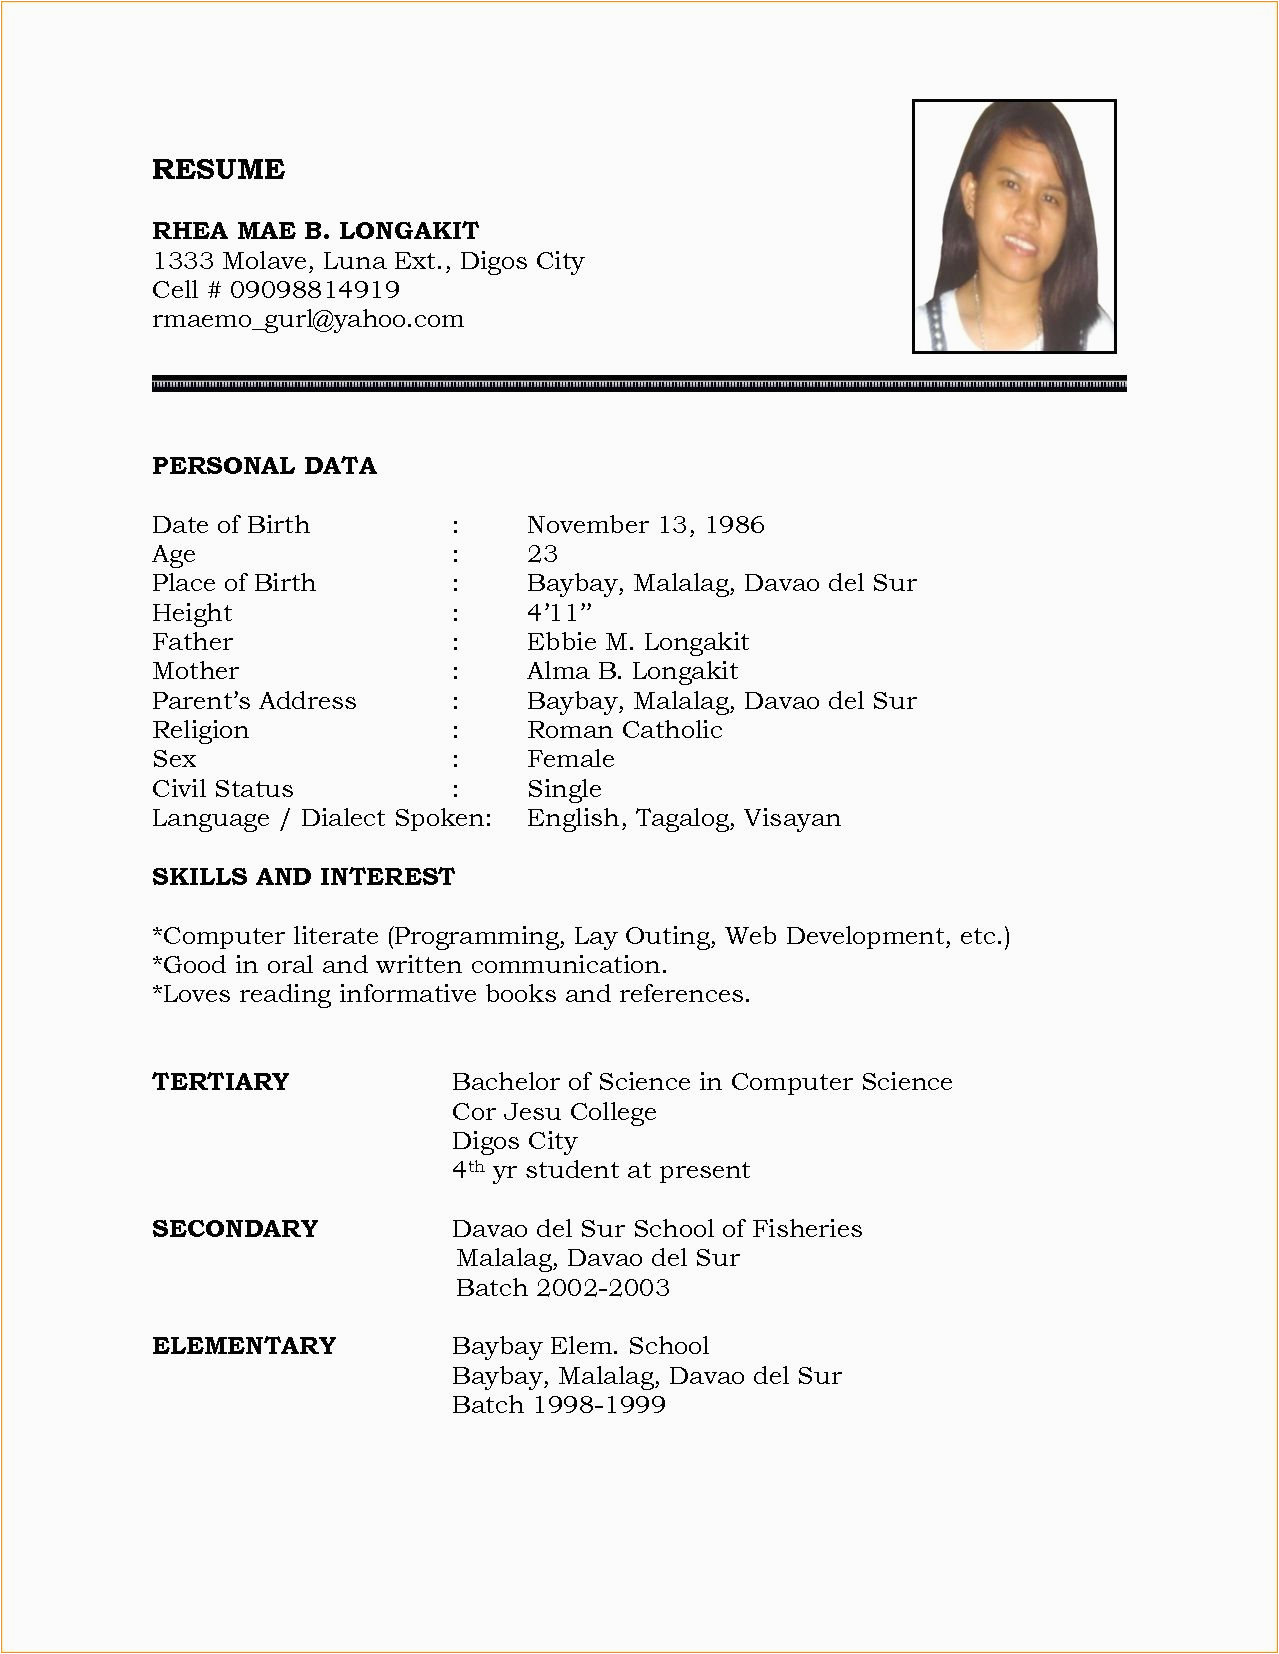 Simple Sample Of Resume for Job Application Sample Resume format for Job Application